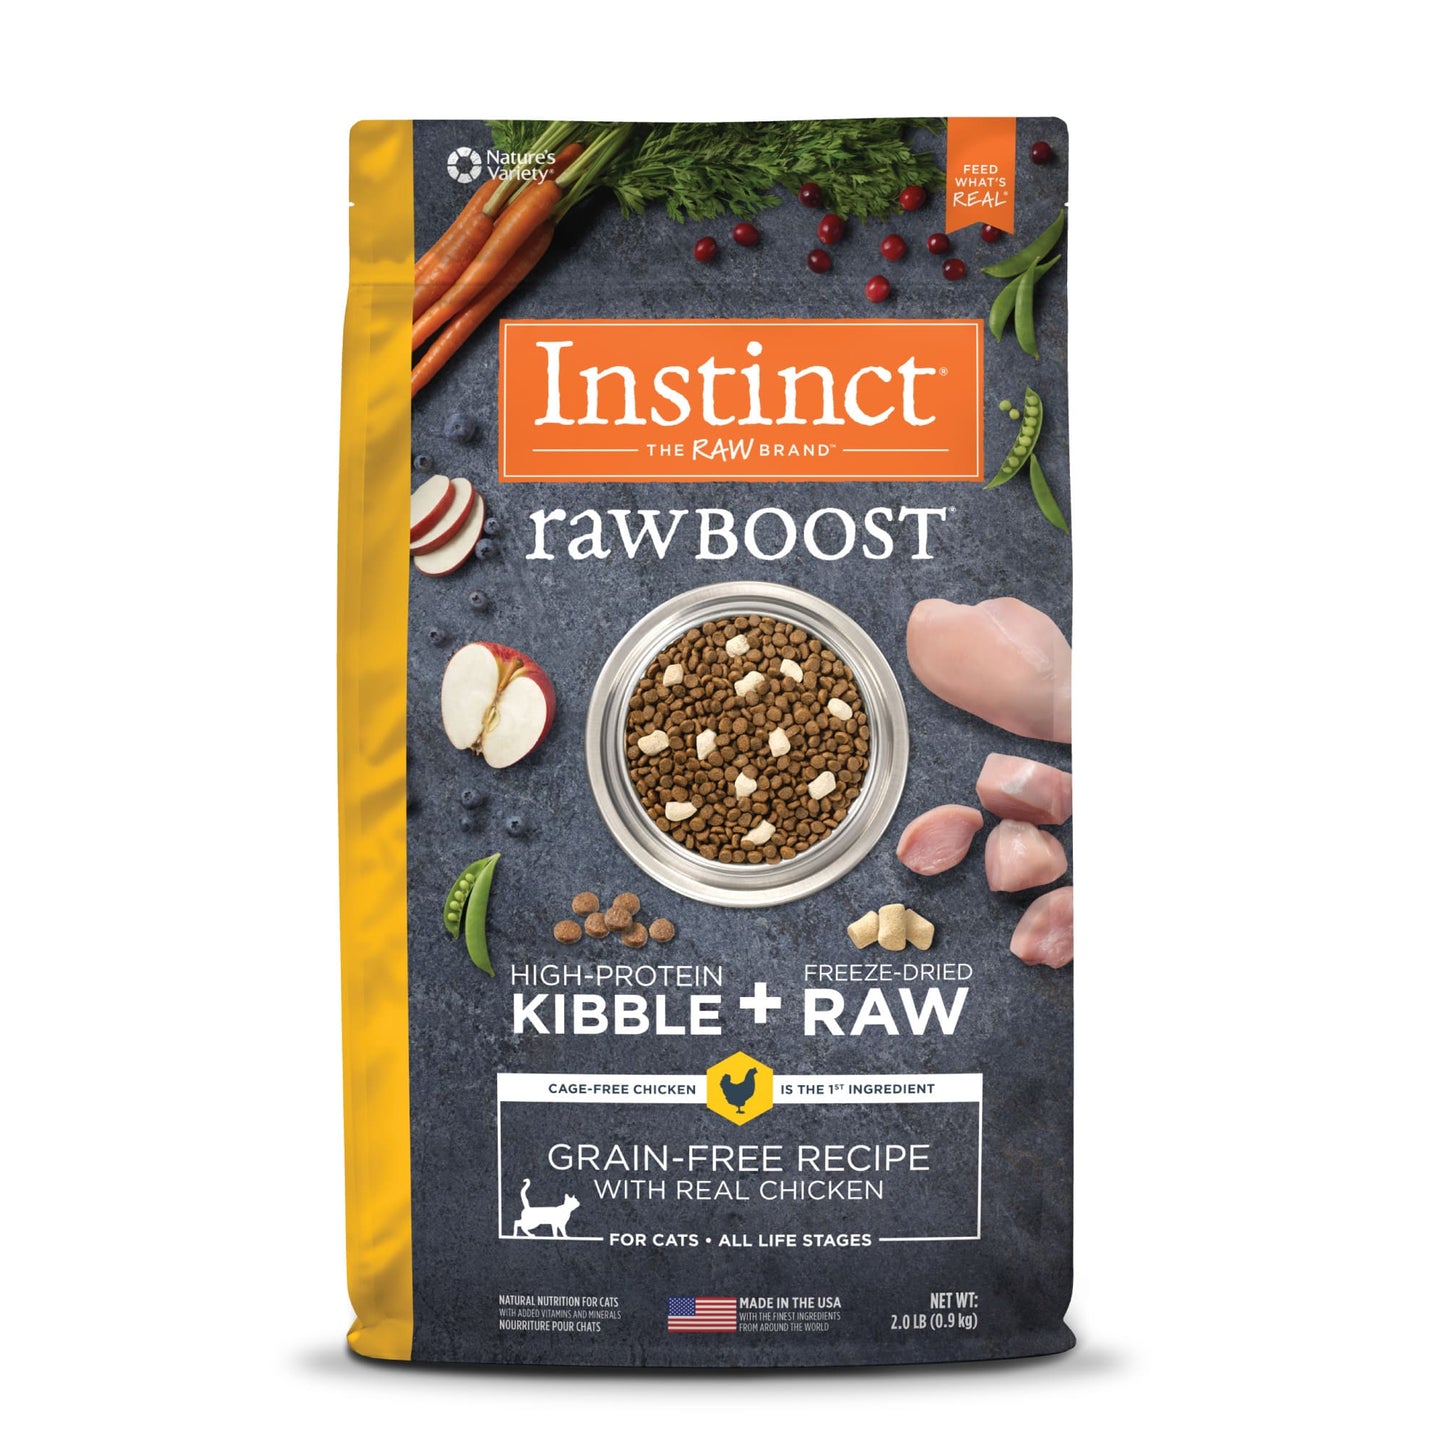 Instinct Raw Boost Grain-Free Recipe with Real Chicken Natural Dry Cat Food by Nature s Variety  2 lb. Bag